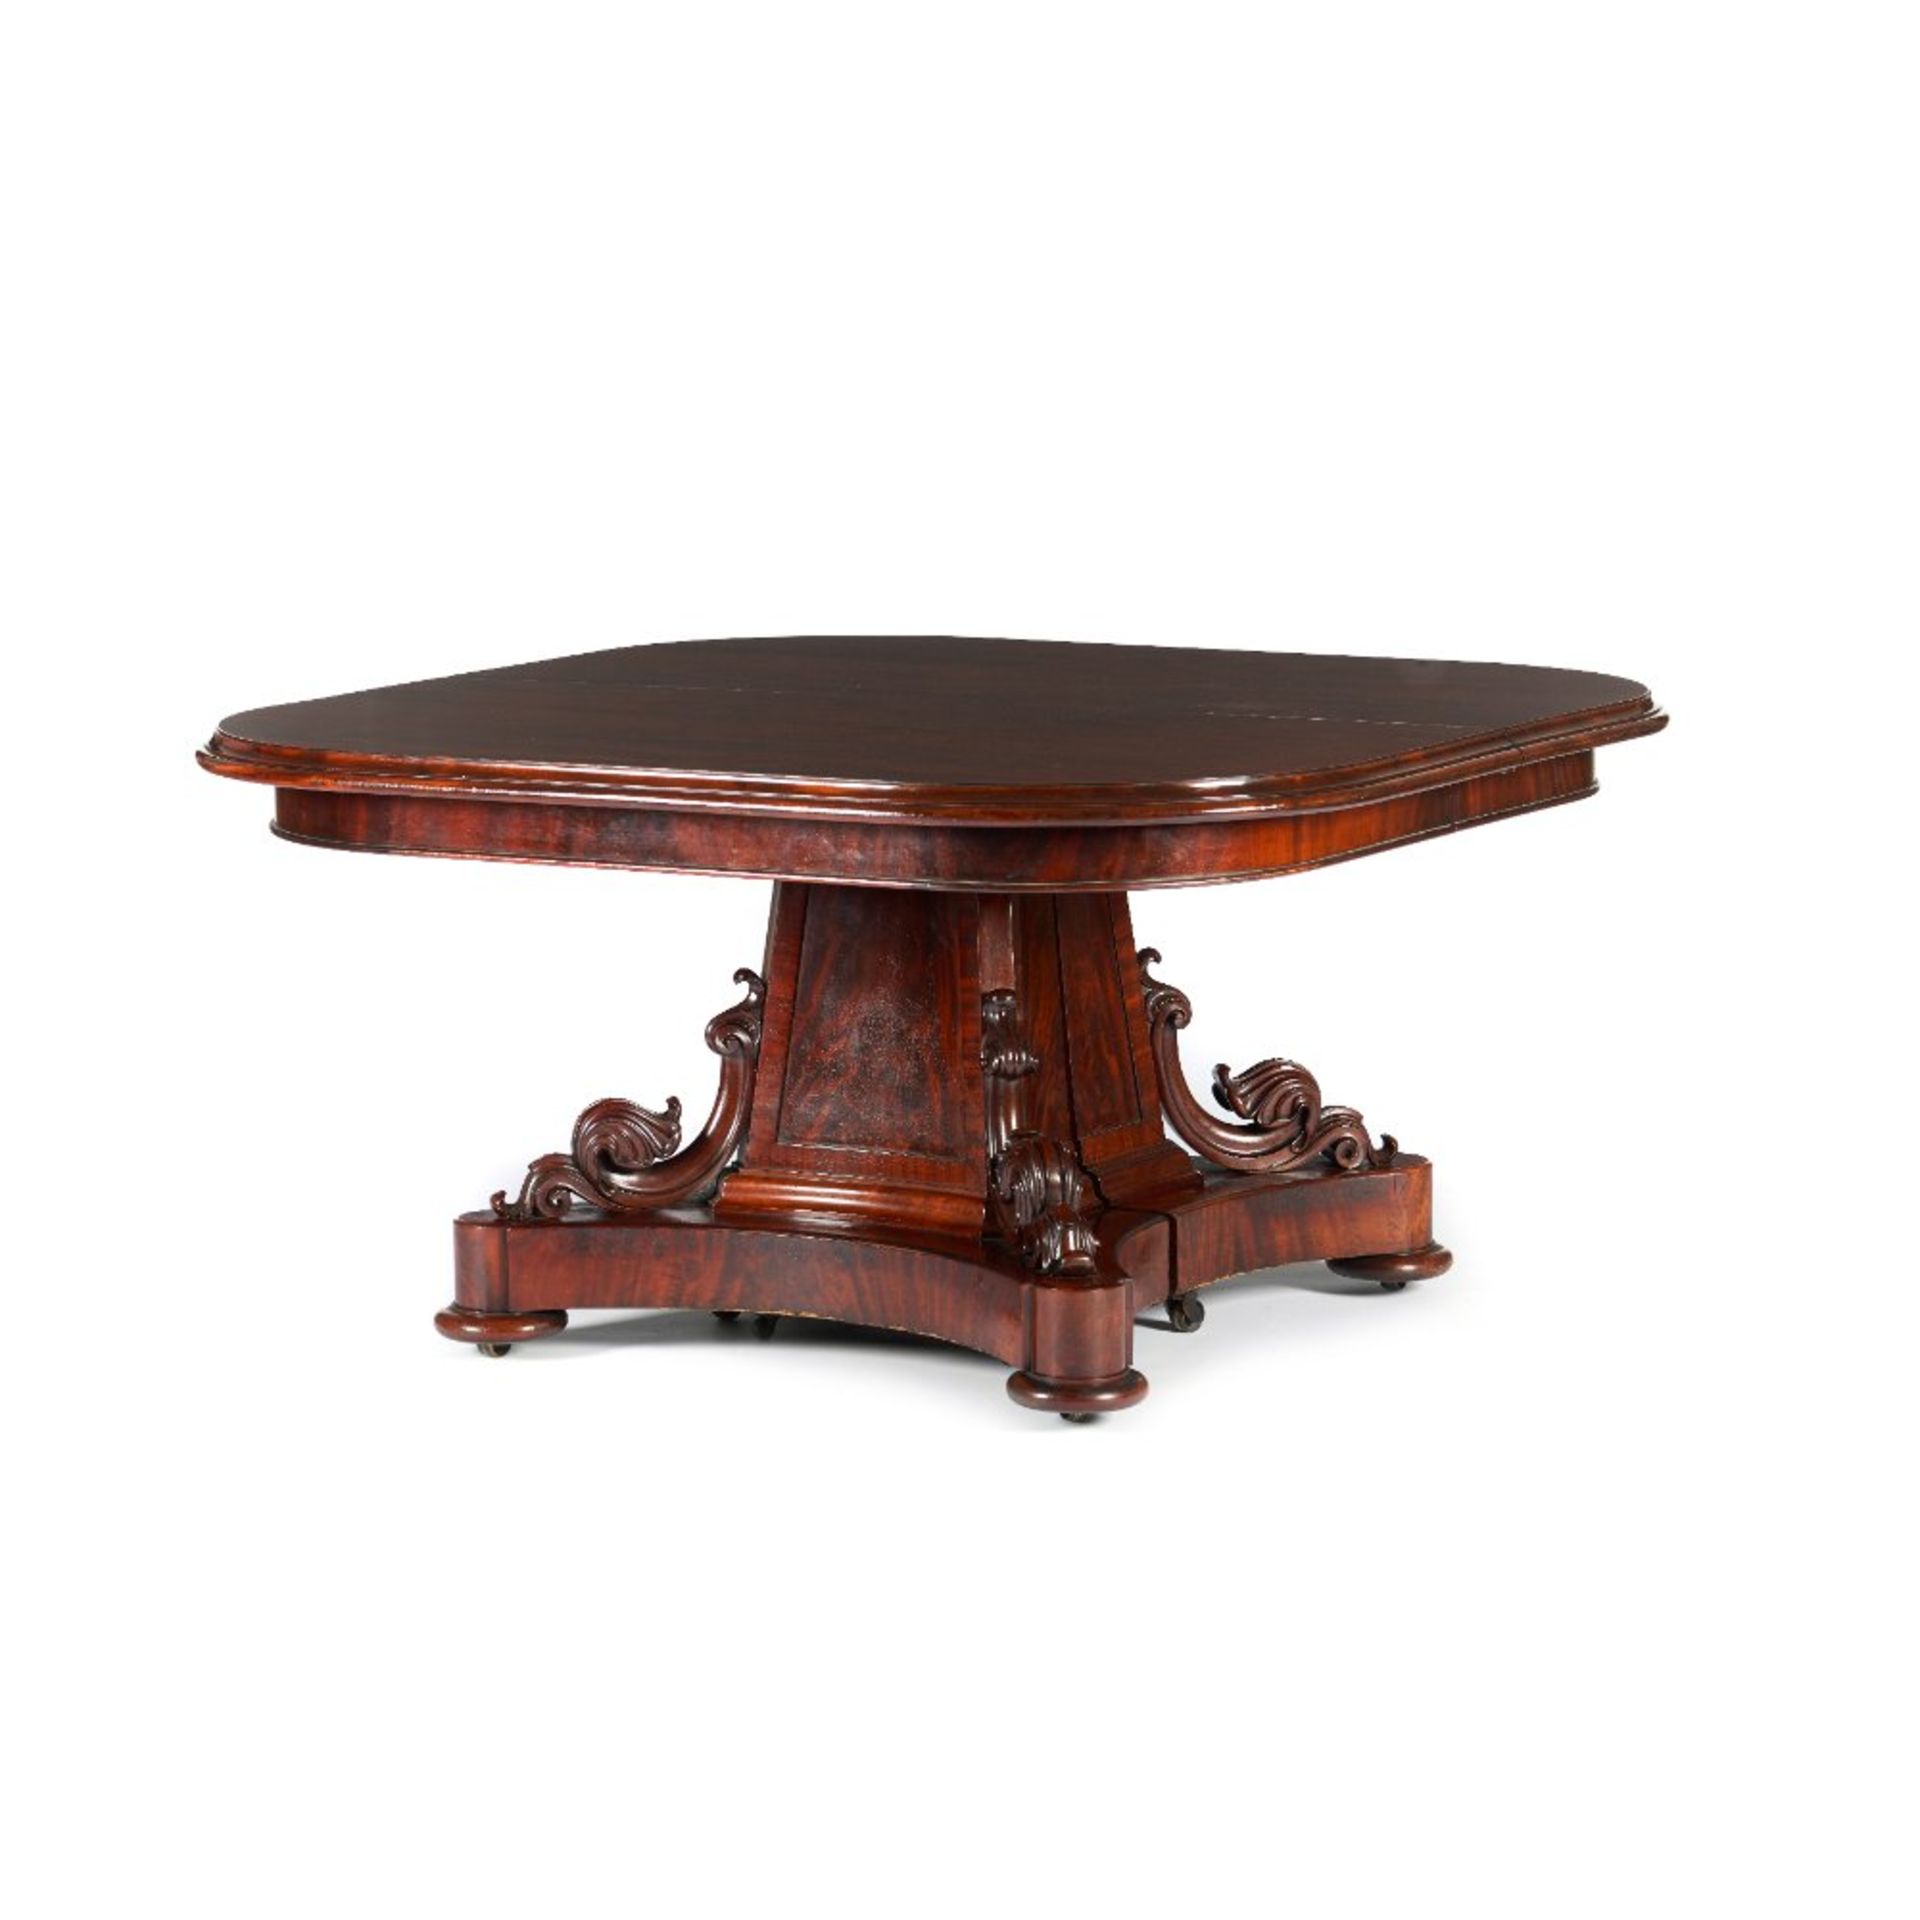 An William IV Dining Table - Image 4 of 6